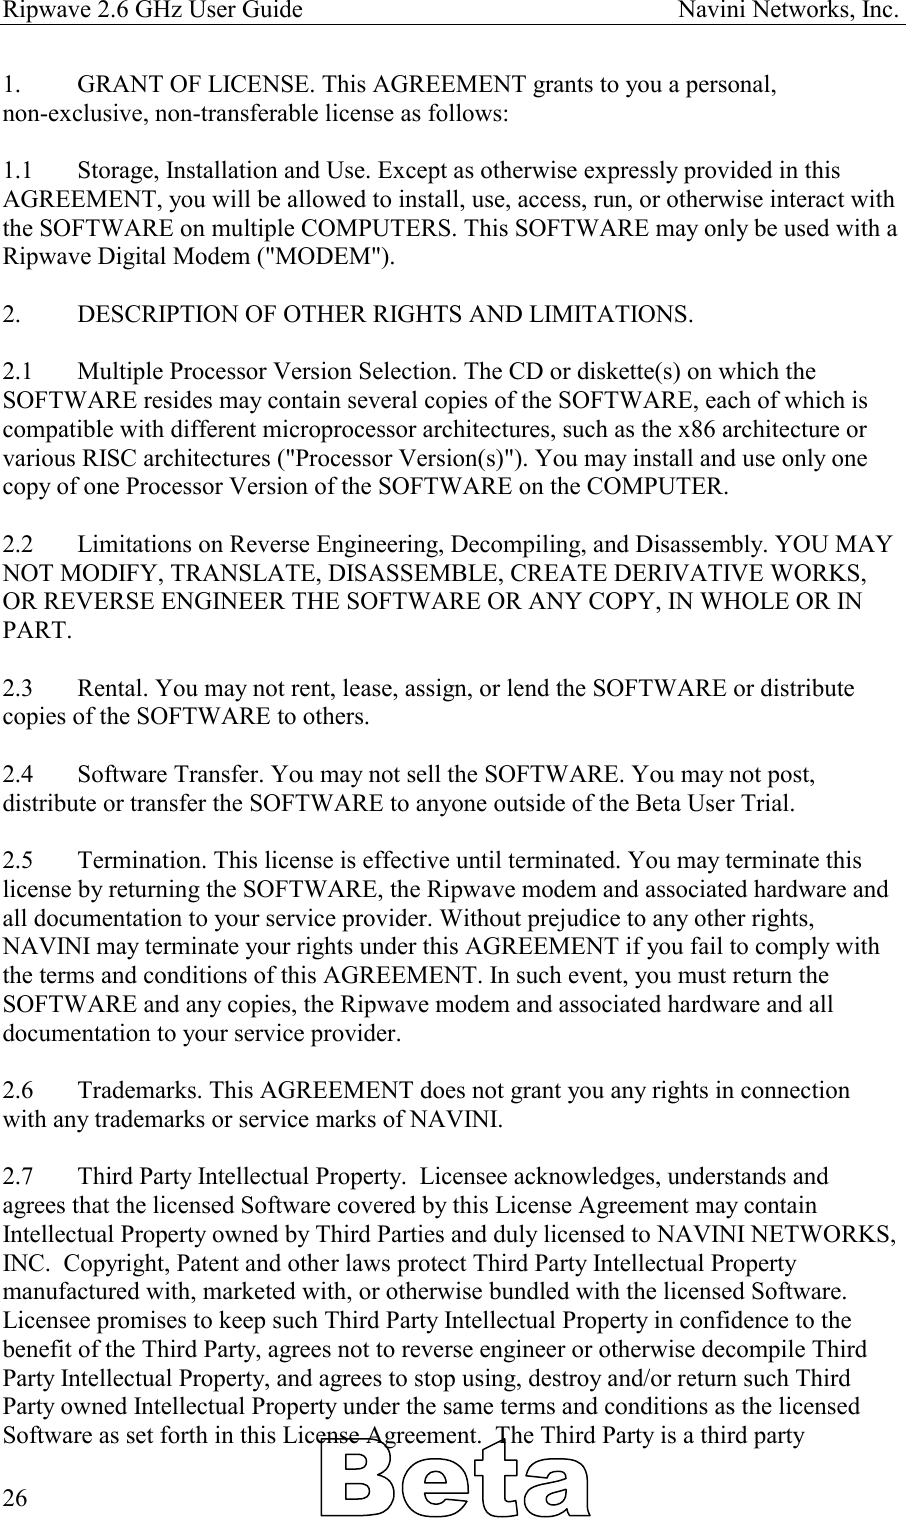 Ripwave 2.6 GHz User Guide                                                            Navini Networks, Inc. 1.  GRANT OF LICENSE. This AGREEMENT grants to you a personal,  non-exclusive, non-transferable license as follows:   1.1  Storage, Installation and Use. Except as otherwise expressly provided in this AGREEMENT, you will be allowed to install, use, access, run, or otherwise interact with the SOFTWARE on multiple COMPUTERS. This SOFTWARE may only be used with a Ripwave Digital Modem (&quot;MODEM&quot;).  2.   DESCRIPTION OF OTHER RIGHTS AND LIMITATIONS.   2.1   Multiple Processor Version Selection. The CD or diskette(s) on which the SOFTWARE resides may contain several copies of the SOFTWARE, each of which is compatible with different microprocessor architectures, such as the x86 architecture or various RISC architectures (&quot;Processor Version(s)&quot;). You may install and use only one copy of one Processor Version of the SOFTWARE on the COMPUTER.  2.2   Limitations on Reverse Engineering, Decompiling, and Disassembly. YOU MAY NOT MODIFY, TRANSLATE, DISASSEMBLE, CREATE DERIVATIVE WORKS, OR REVERSE ENGINEER THE SOFTWARE OR ANY COPY, IN WHOLE OR IN PART.  2.3   Rental. You may not rent, lease, assign, or lend the SOFTWARE or distribute copies of the SOFTWARE to others.  2.4   Software Transfer. You may not sell the SOFTWARE. You may not post, distribute or transfer the SOFTWARE to anyone outside of the Beta User Trial.  2.5   Termination. This license is effective until terminated. You may terminate this license by returning the SOFTWARE, the Ripwave modem and associated hardware and all documentation to your service provider. Without prejudice to any other rights, NAVINI may terminate your rights under this AGREEMENT if you fail to comply with the terms and conditions of this AGREEMENT. In such event, you must return the SOFTWARE and any copies, the Ripwave modem and associated hardware and all documentation to your service provider.  2.6  Trademarks. This AGREEMENT does not grant you any rights in connection with any trademarks or service marks of NAVINI.  2.7  Third Party Intellectual Property.  Licensee acknowledges, understands and agrees that the licensed Software covered by this License Agreement may contain Intellectual Property owned by Third Parties and duly licensed to NAVINI NETWORKS, INC.  Copyright, Patent and other laws protect Third Party Intellectual Property manufactured with, marketed with, or otherwise bundled with the licensed Software.  Licensee promises to keep such Third Party Intellectual Property in confidence to the benefit of the Third Party, agrees not to reverse engineer or otherwise decompile Third Party Intellectual Property, and agrees to stop using, destroy and/or return such Third Party owned Intellectual Property under the same terms and conditions as the licensed Software as set forth in this License Agreement.  The Third Party is a third party   26